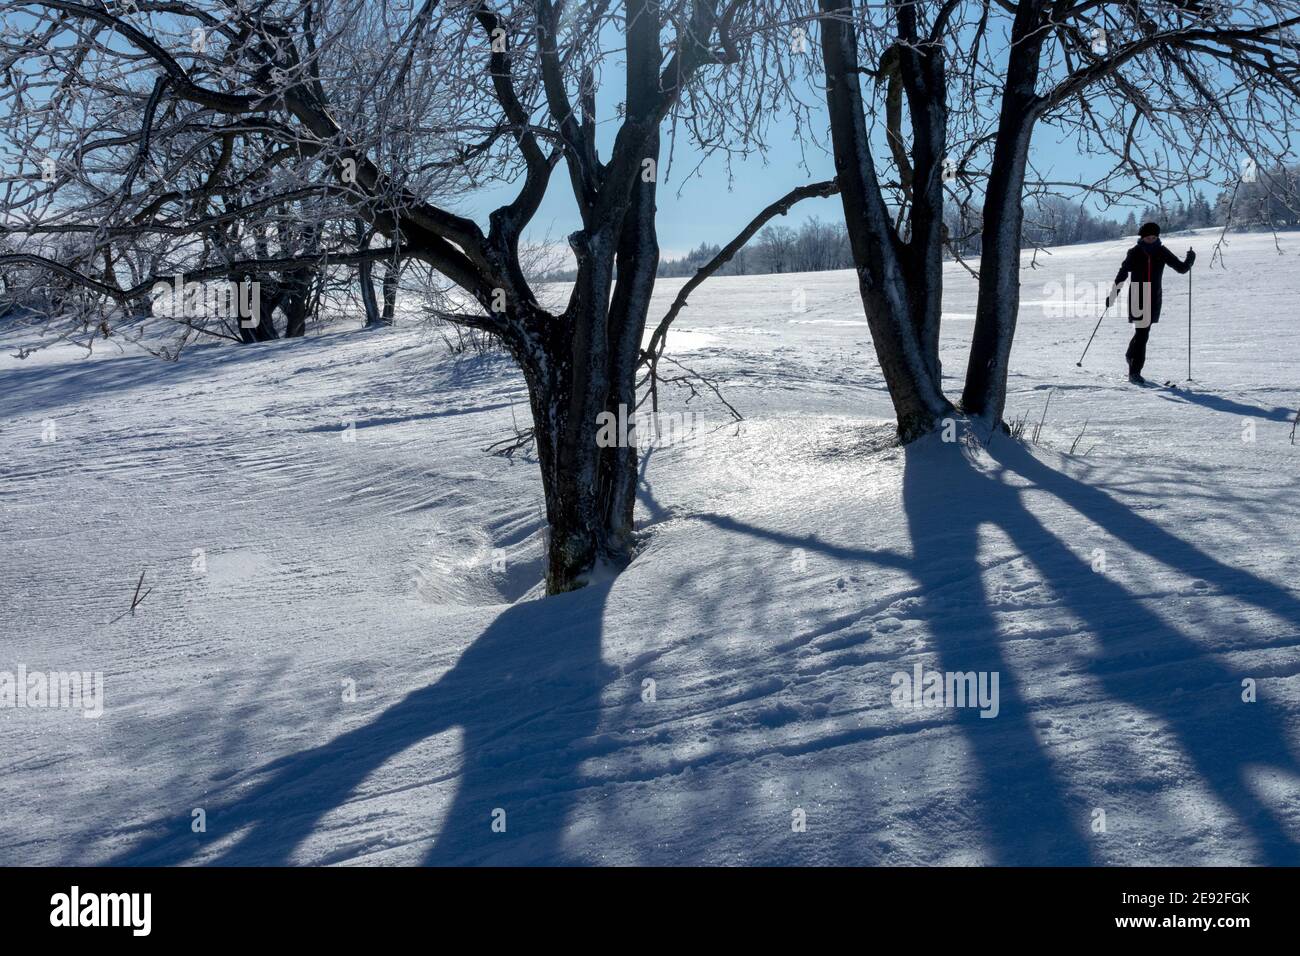 Single person cross country skiing in a snowy landscape lit by the winter sun shadow trees Stock Photo